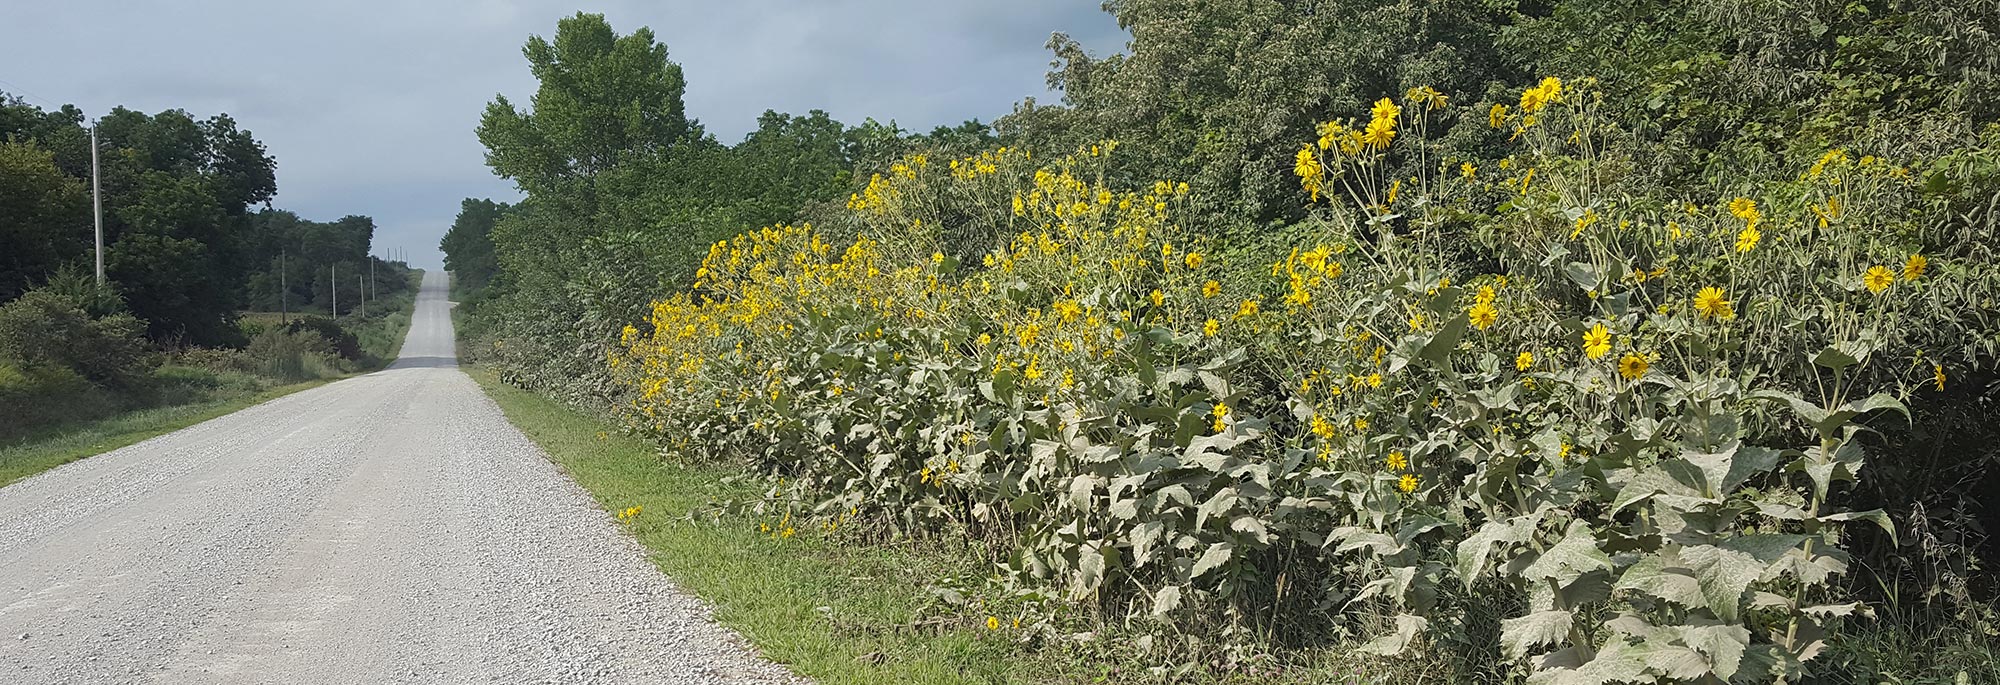 Ditch bursting with sunflowers along a gravel road in rural Iowa